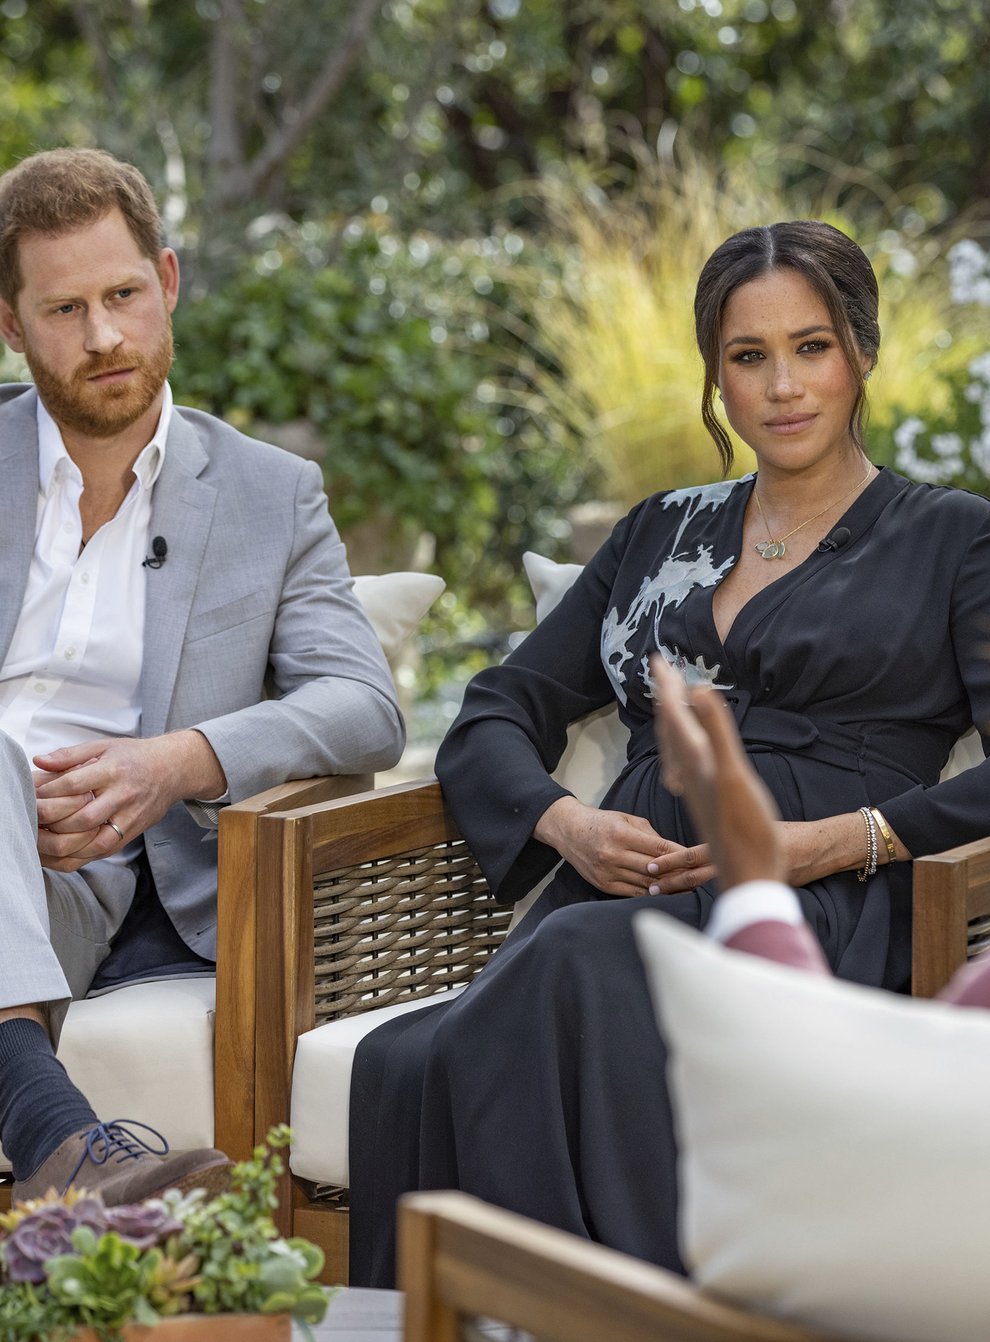 The Duke and Duchess of Sussex told Oprah Winfrey of their shock and concerns at security being removed when they stepped back from royal life (Joe Pugliese/Harpo Productions/PA)